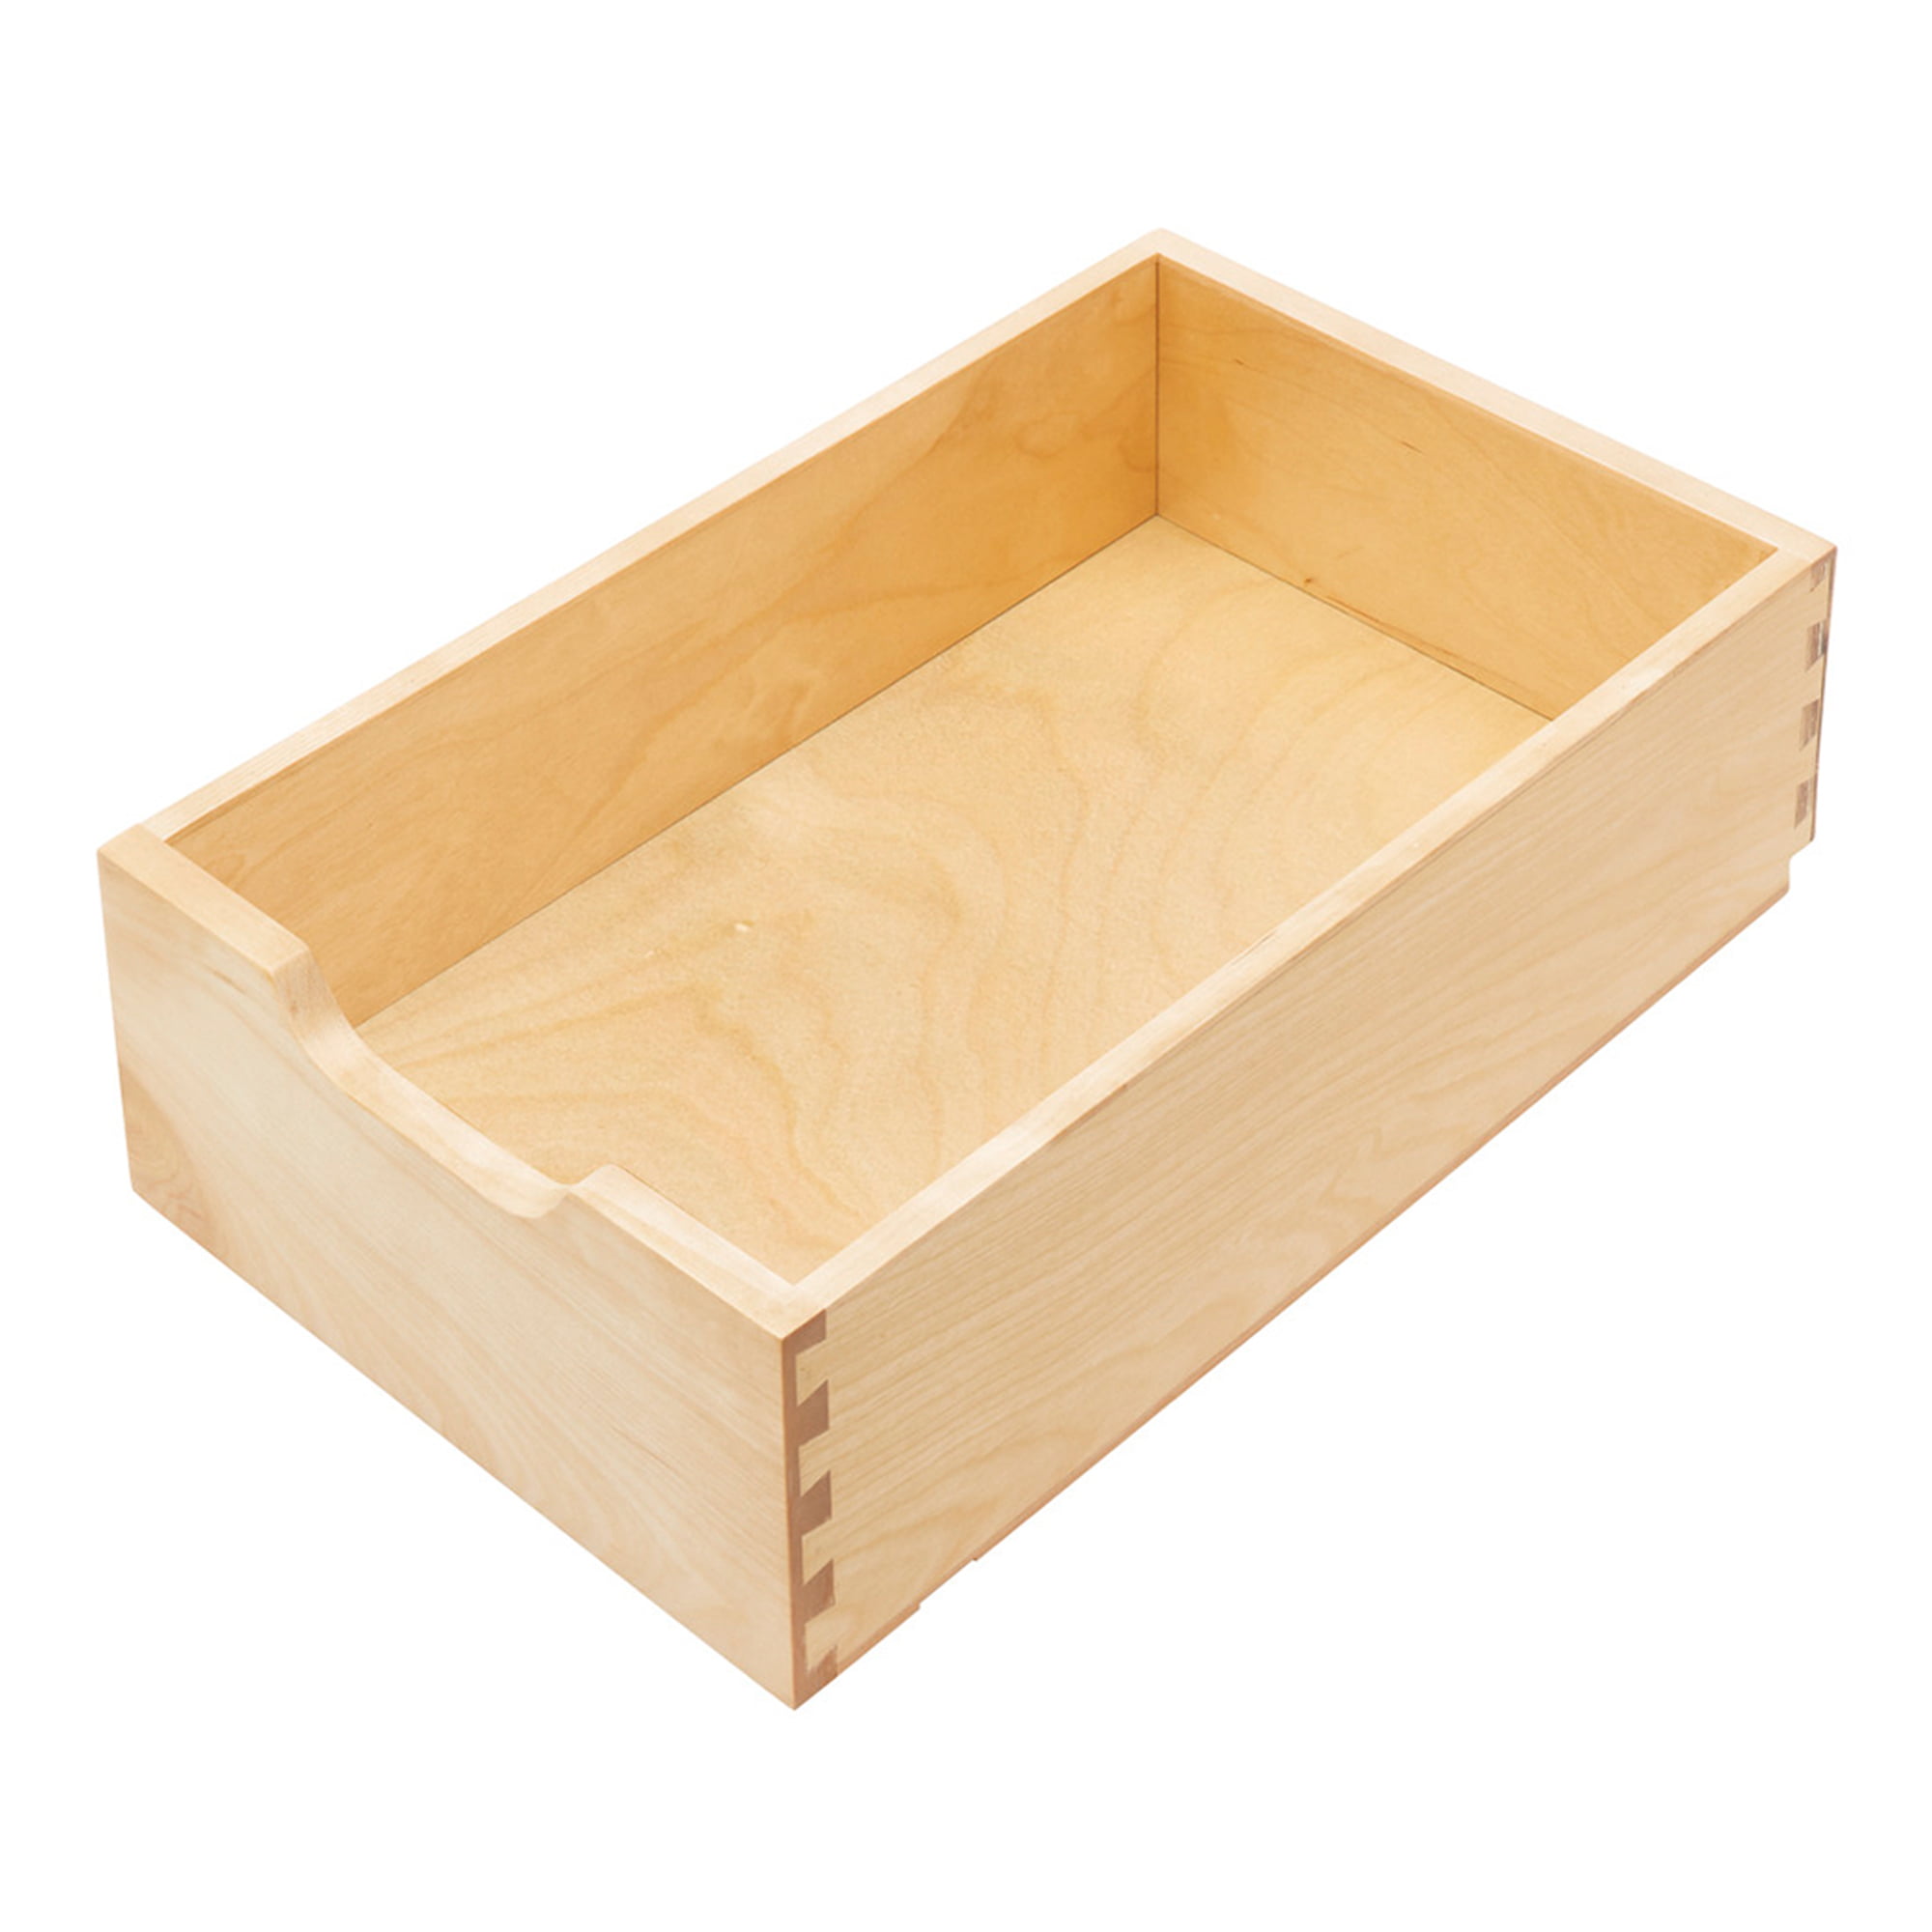 11" Rev-A-Shelf 4WDB-1218SC-1 Wood Cabinet Pull Out Storage Drawer (Natural) $51 + Free Shipping